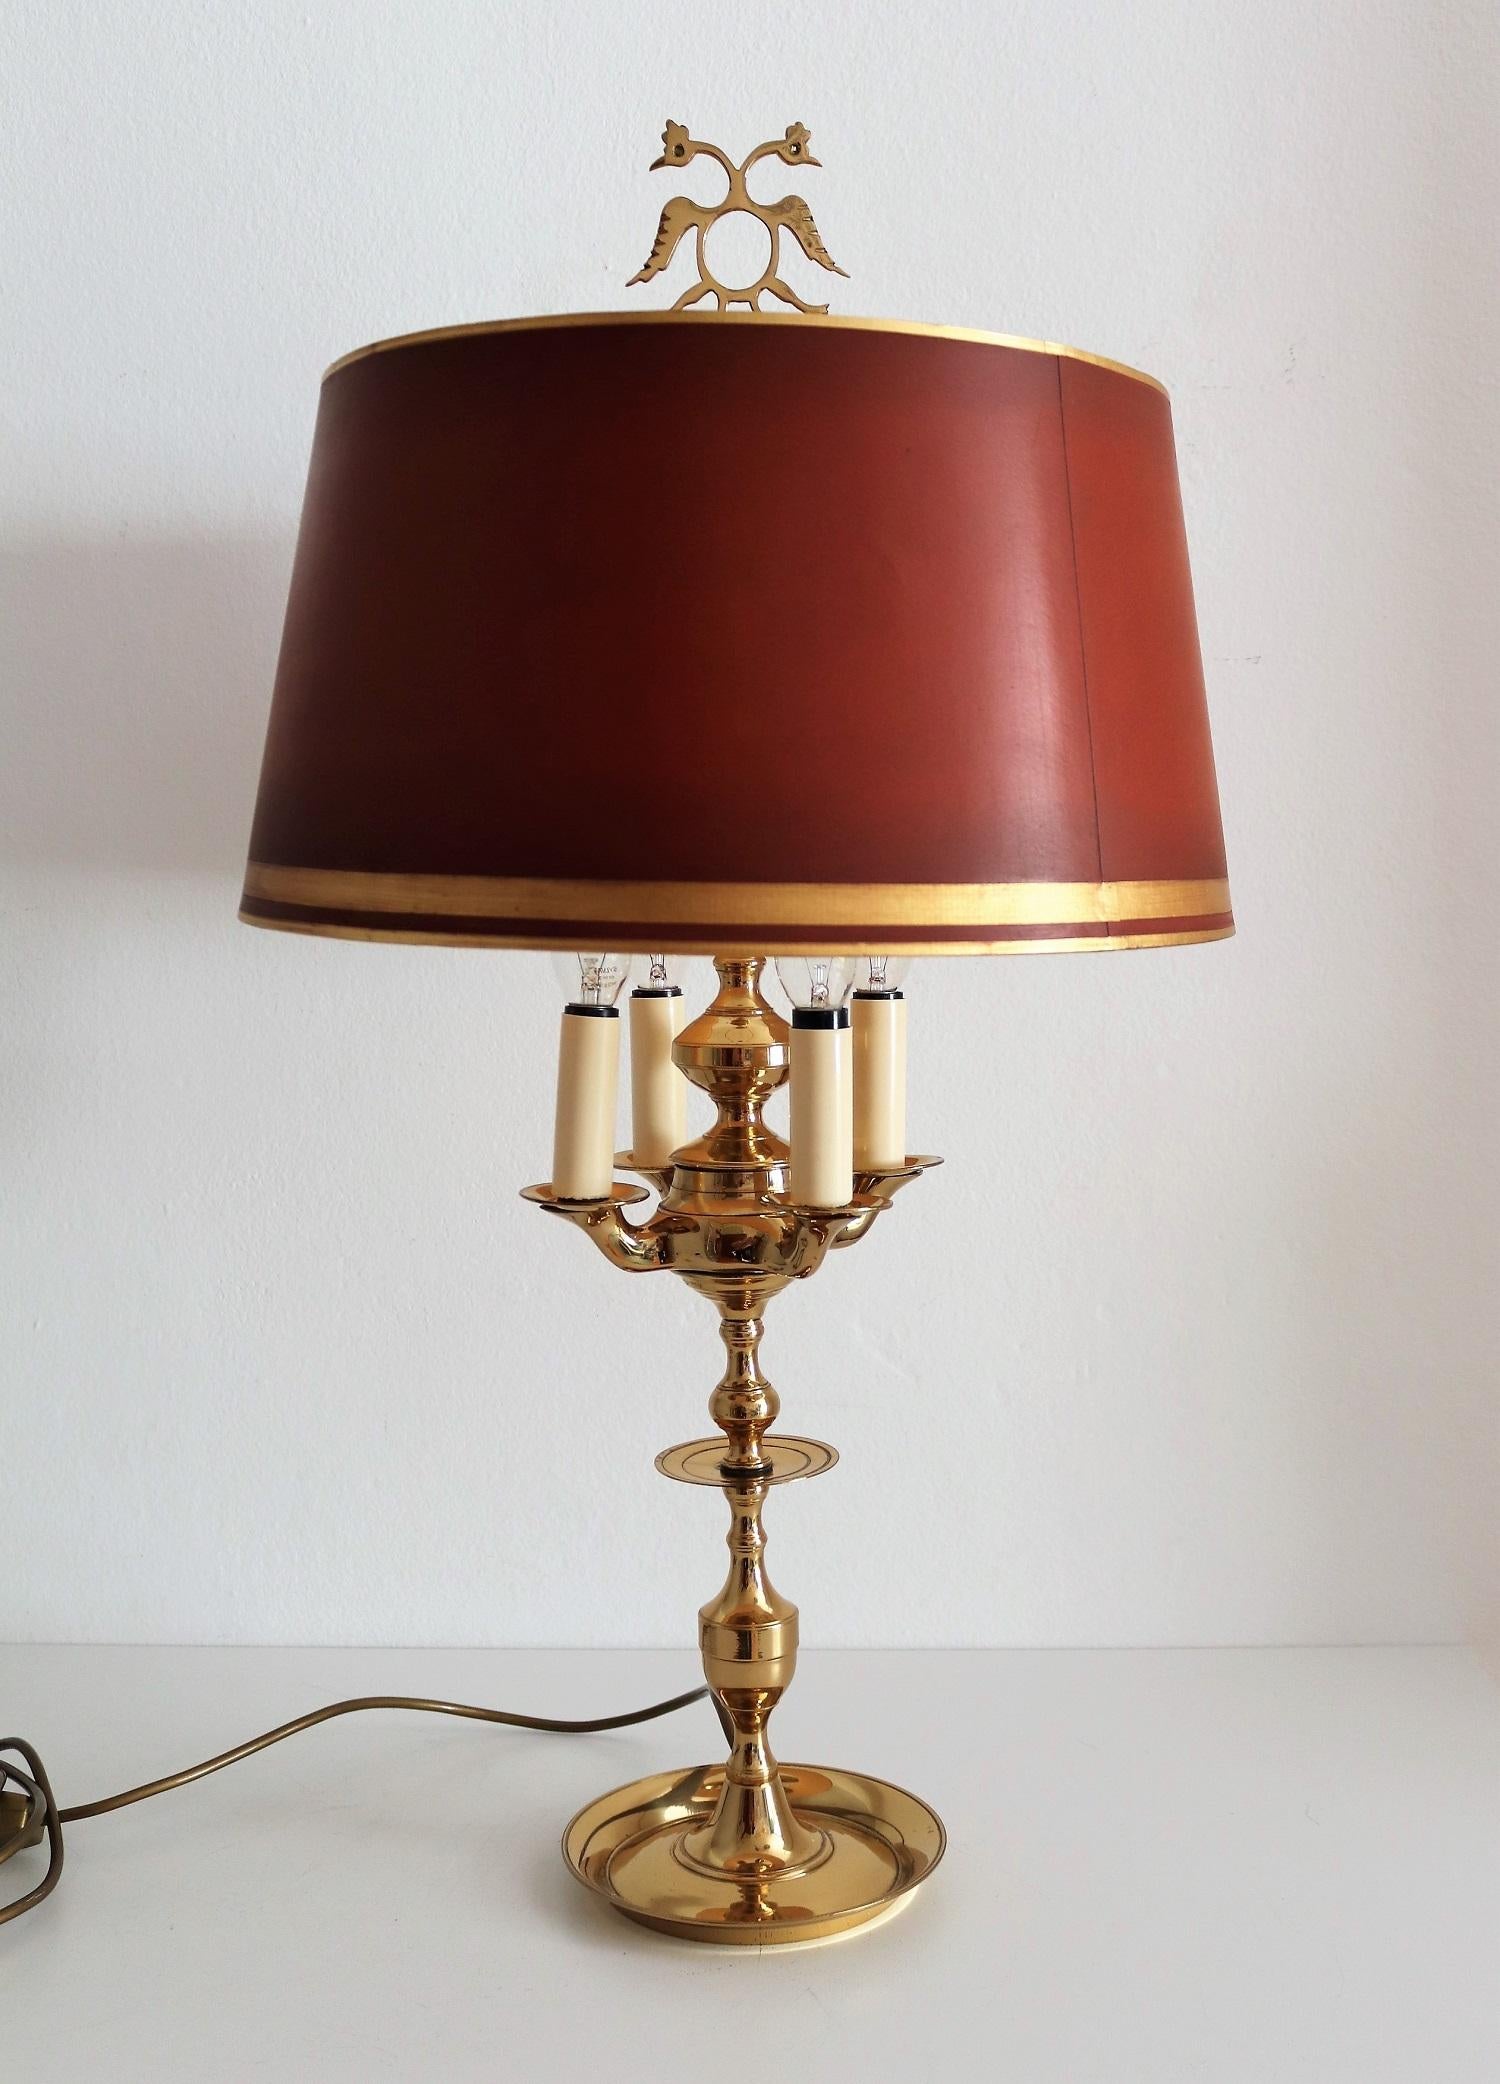 Gorgeous Bouillotte table lamp made of full brass during the midcentury, but in the style of Louis XVI.
The lamp has four arms for small candelabra light bulbs.
The top ends up with an eagle shaped detail, also of full brass.
The lamp shade in